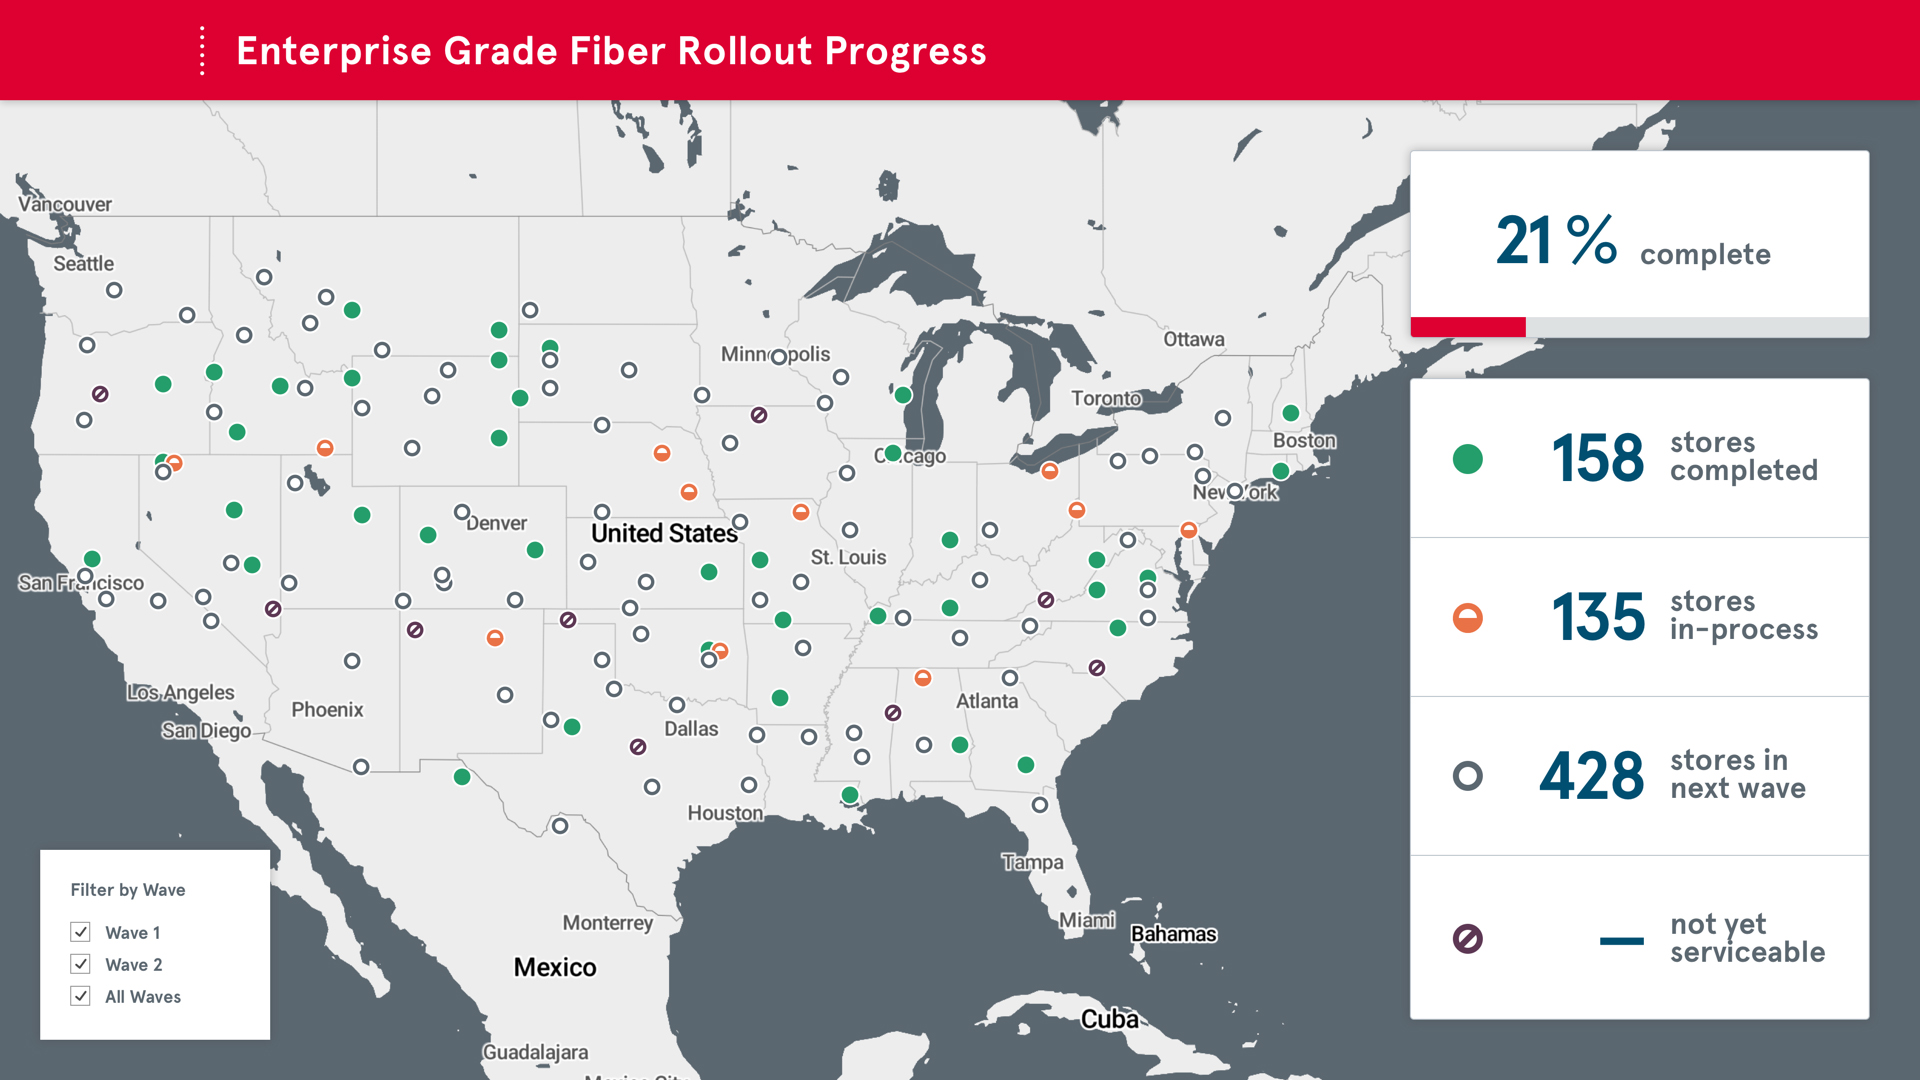 Dashboard with map of United States showing locations of fiber rollout and progress